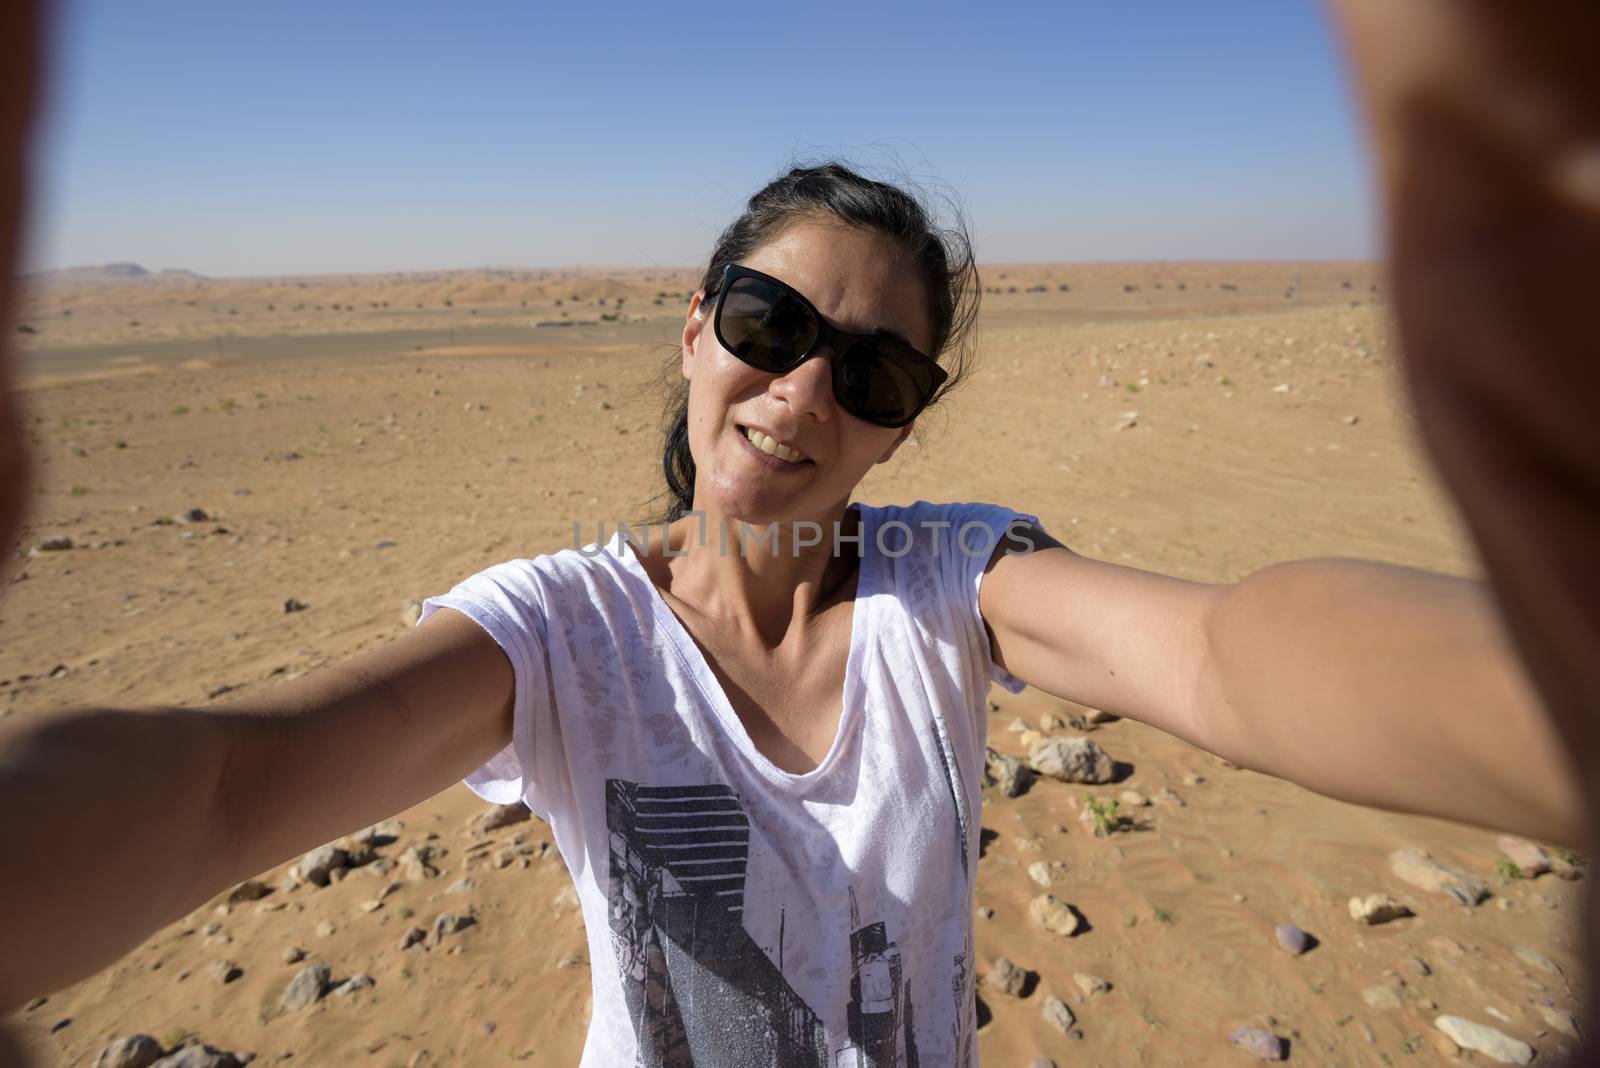 Woman taking a selfie in the desert with wide angle lens, in the 40s. We can see the desert with some dunes and stones behind her